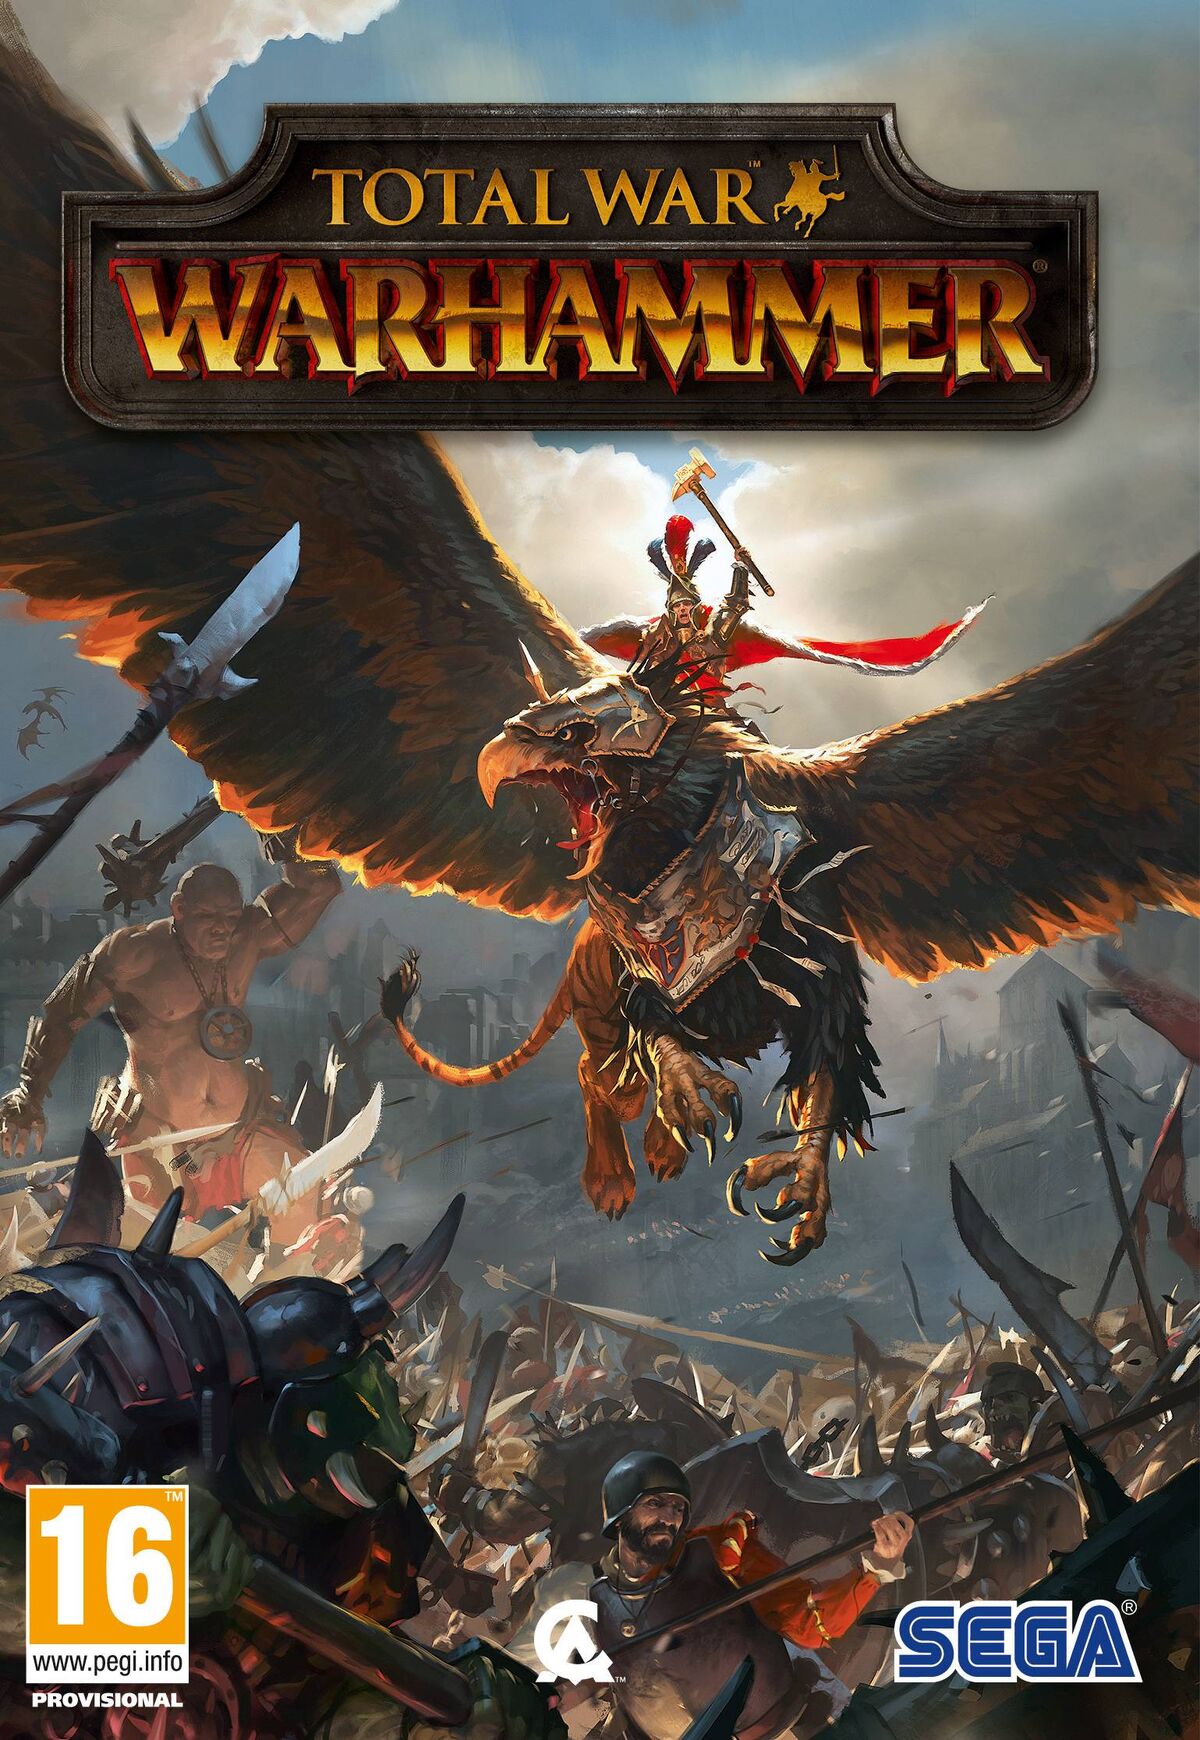 Total War: WARHAMMER III  Download and Buy Today - Epic Games Store